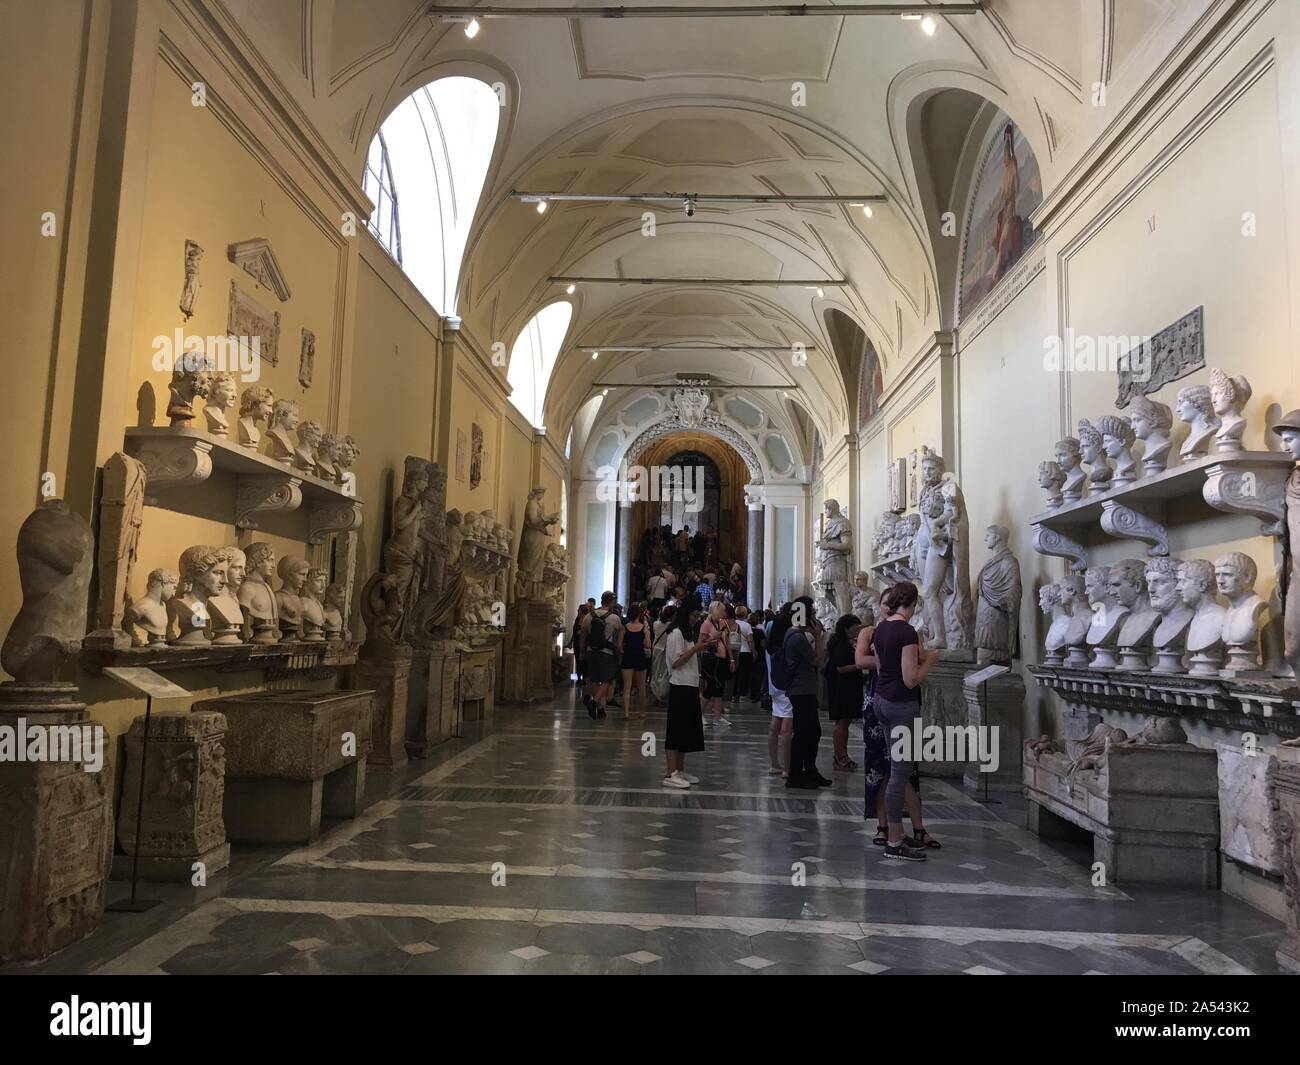 October 18, 2019, Vatican, Vatican, China: The Vatican museum is the museum of the smallest country in the world.With a total area of 55,000 square meters, the museum, formerly the papal court, is mainly used for the collection and preservation of rare cultural relics and art treasures. (Credit Image: © SIPA Asia via ZUMA Wire) Stock Photo